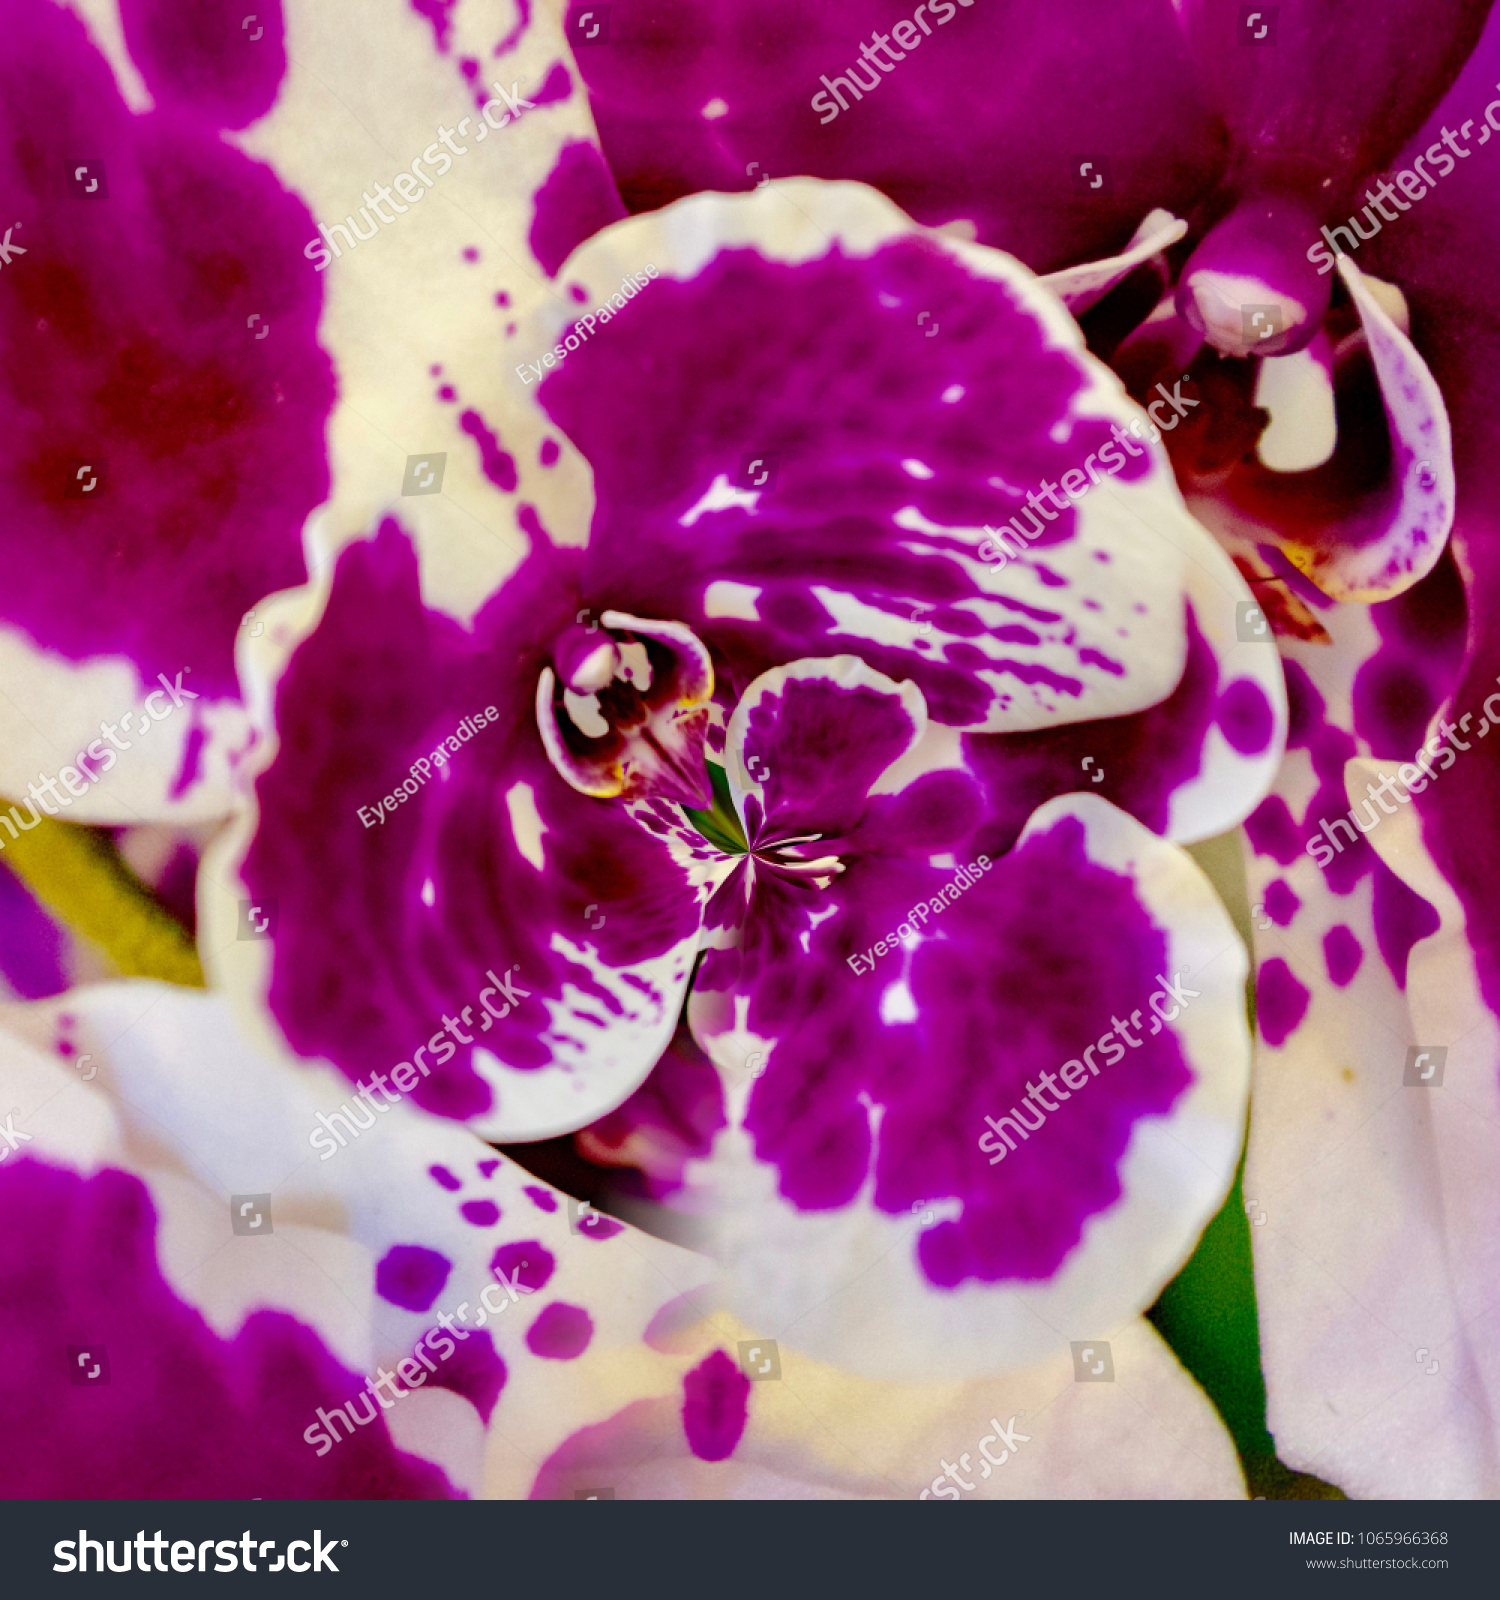 Creative Background Artwork Design Orchid Flowers Stock Photo Edit Now 1065966368